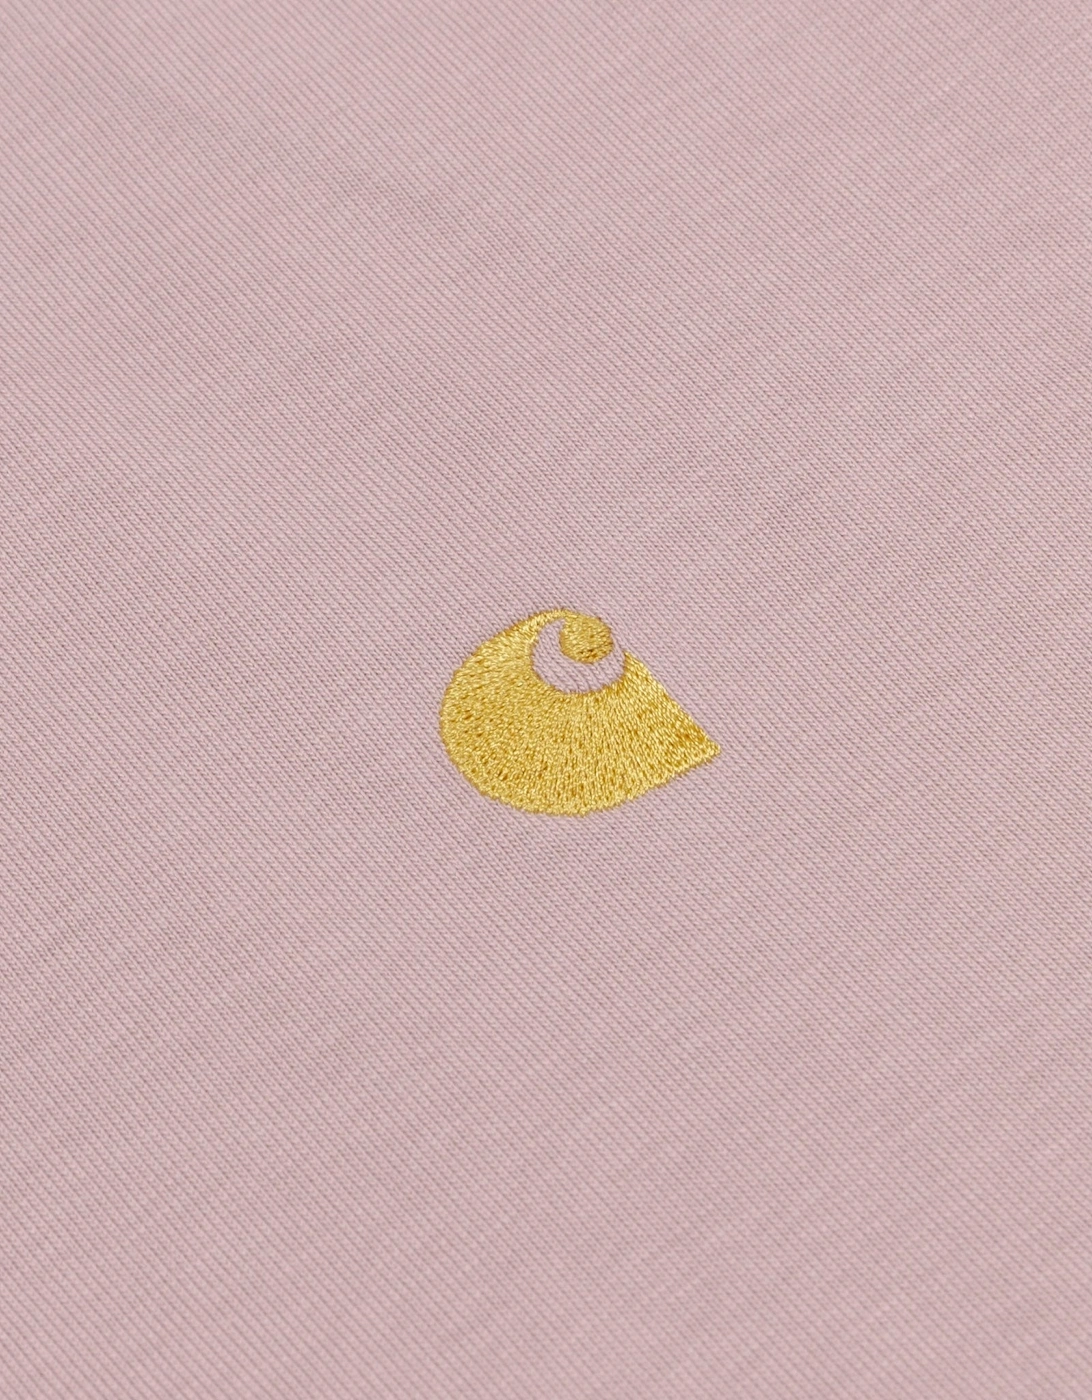 Chase T-Shirt - Glassy Pink/Gold